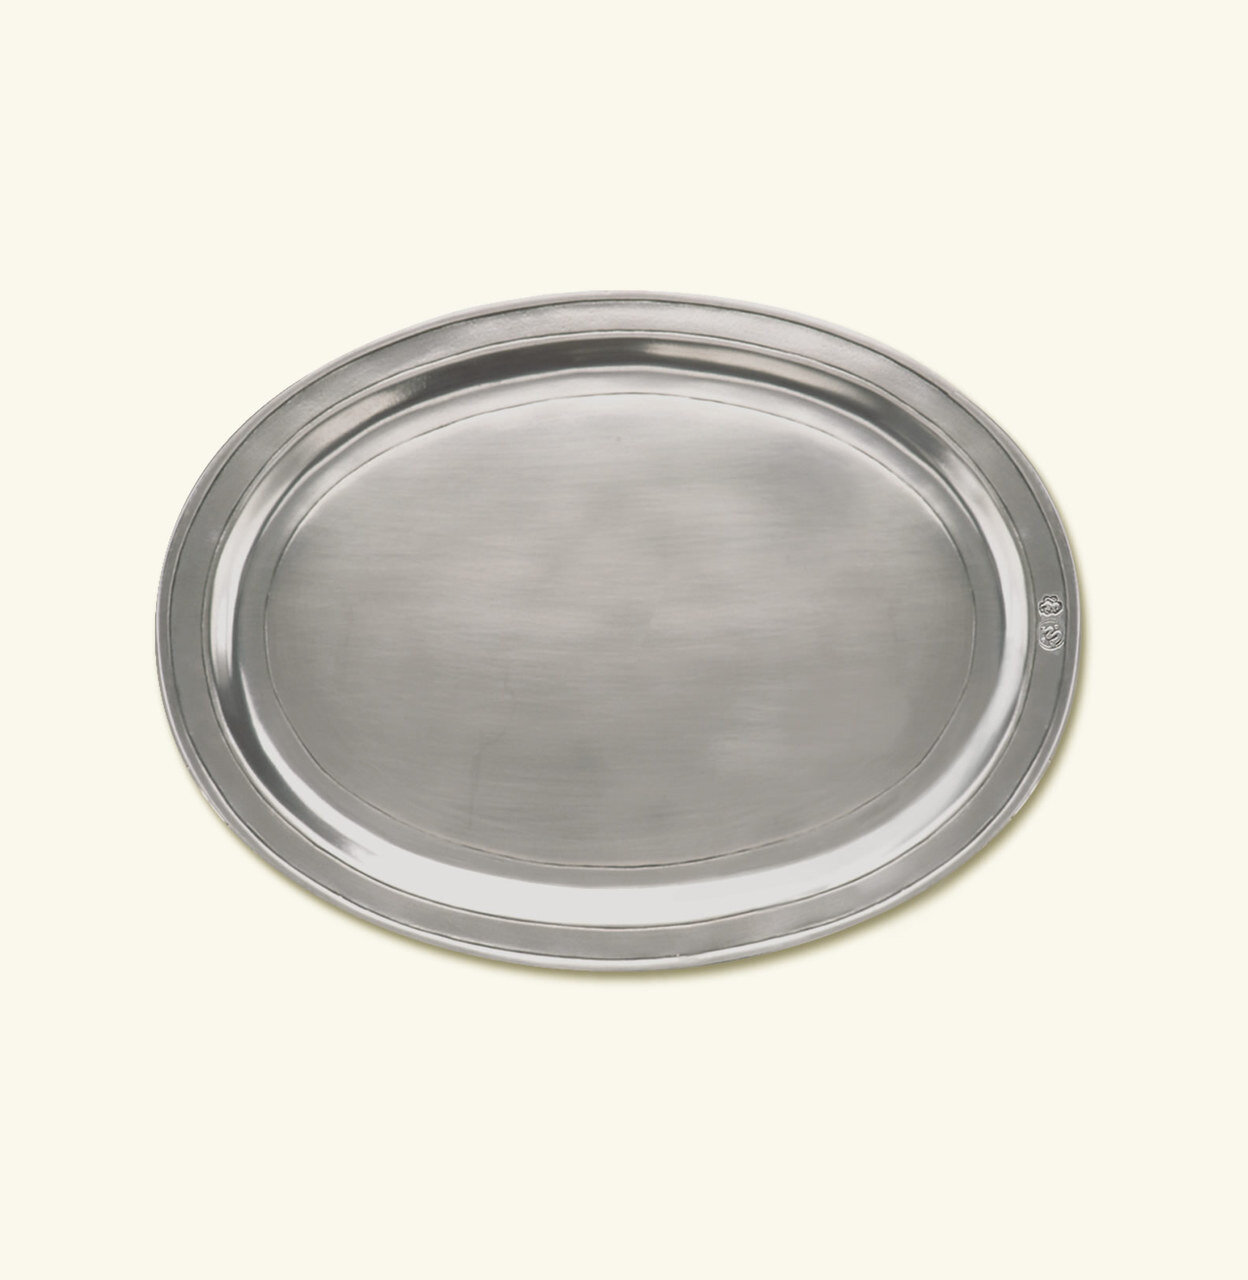 Match Pewter Oval Incised Tray Medium 847.1